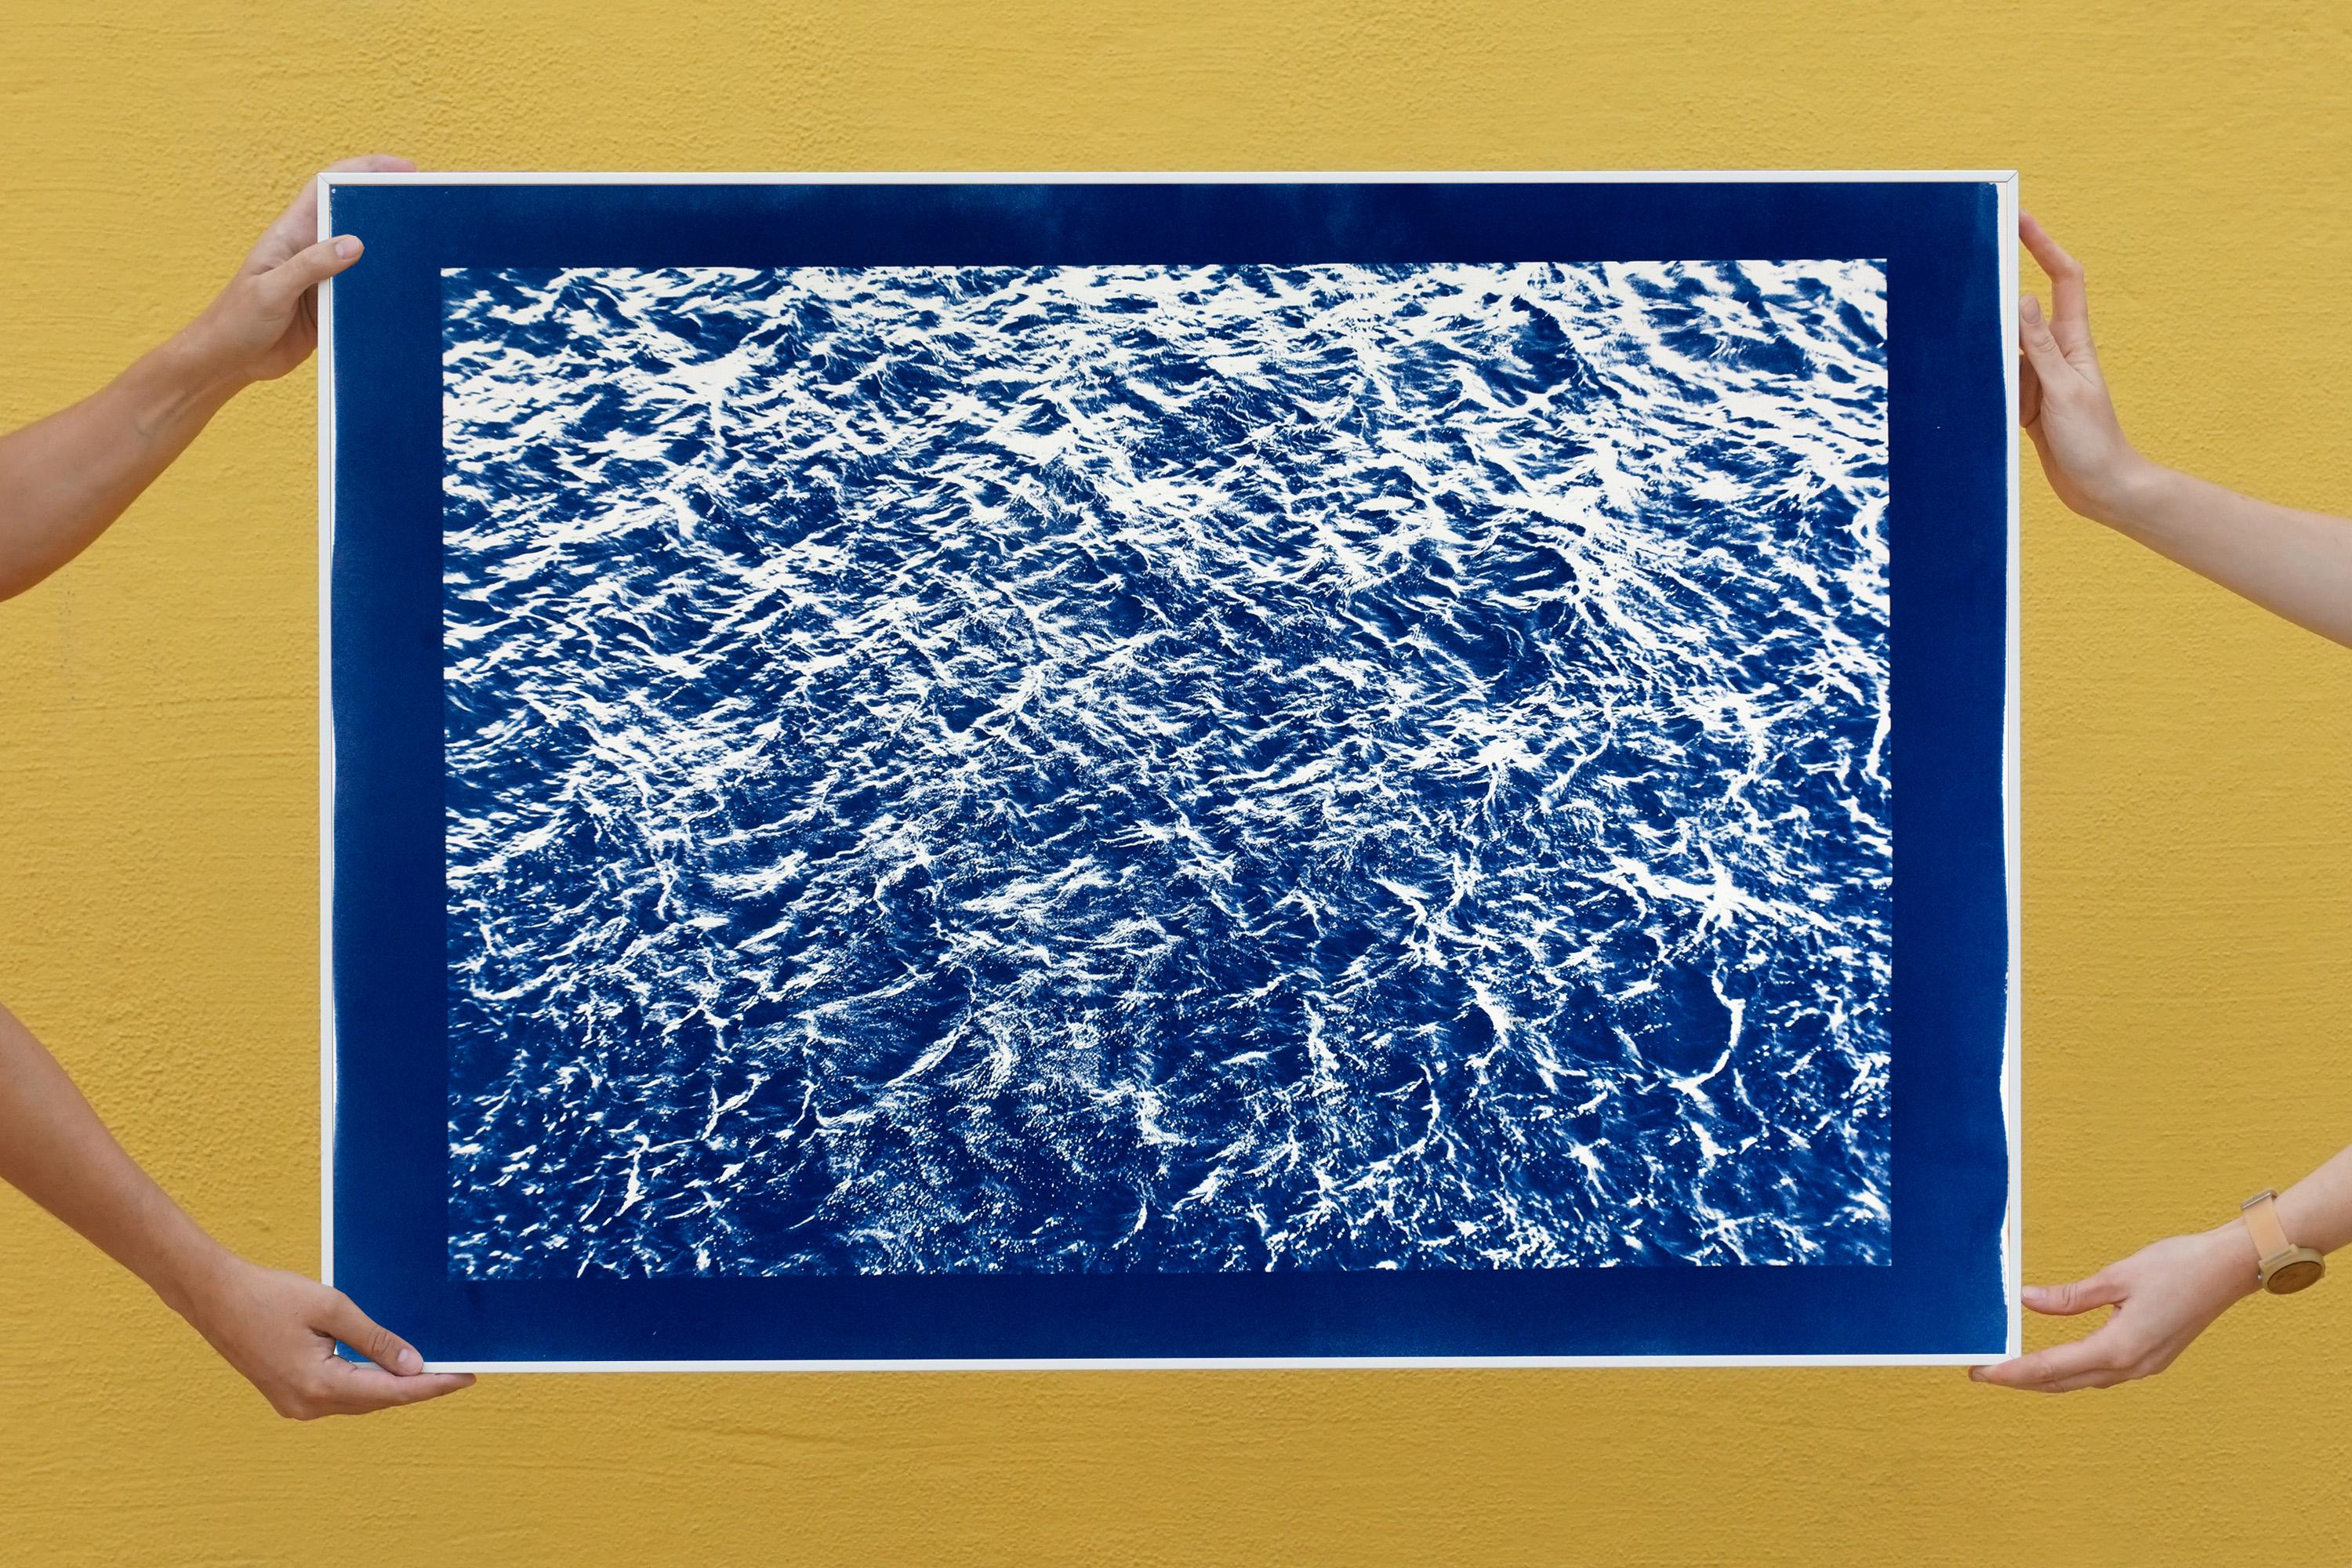 Extra Large Cyanotype Seascape of Pacific Ocean Currents, Nautical Blue & White - Purple Landscape Photograph by Kind of Cyan